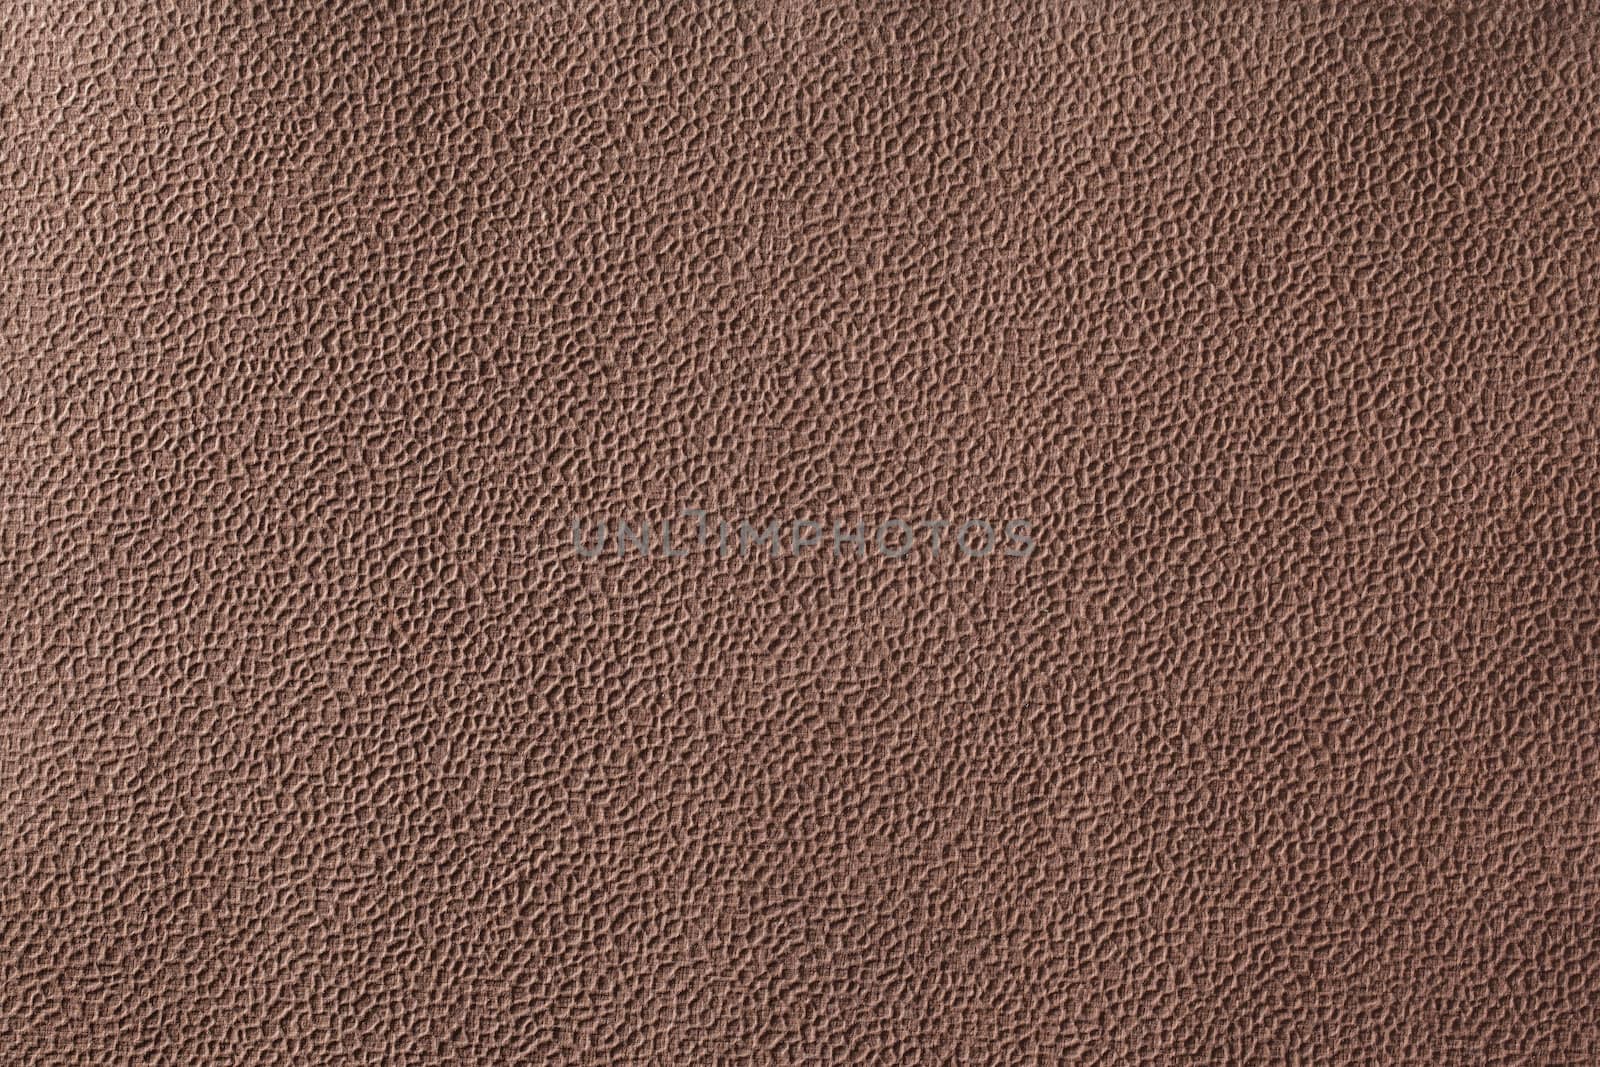 Background texture of brown bumpy handmade paper.